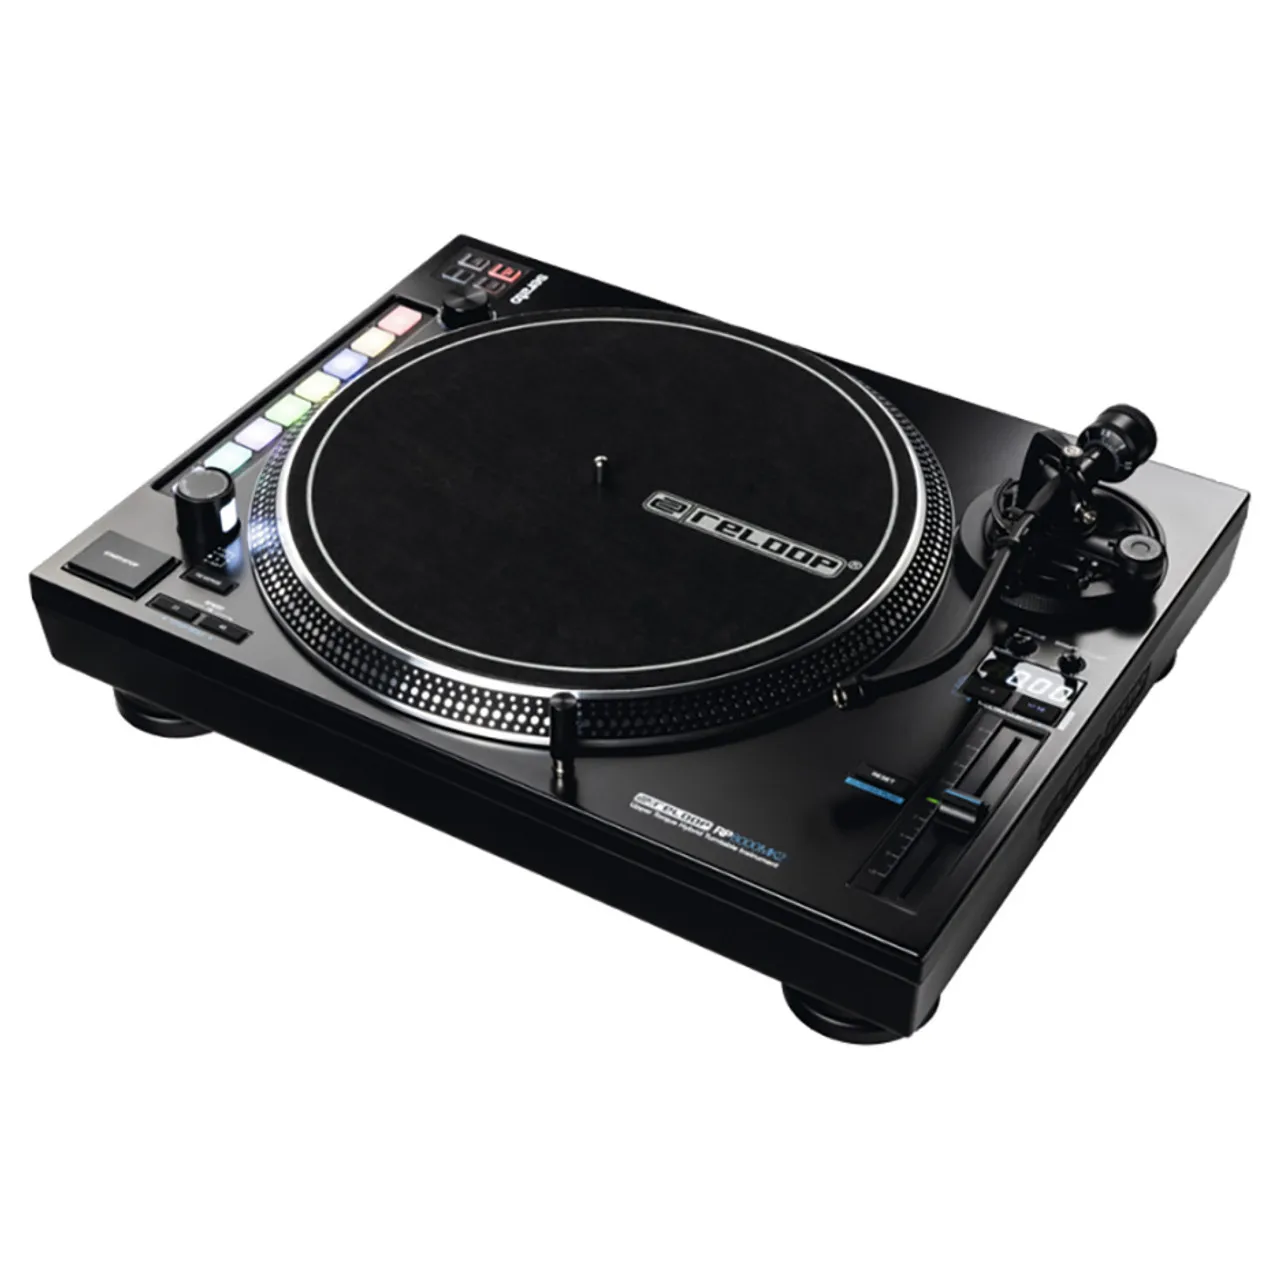 

Summer Discount on Reloop RP-8000 mkii Serato Compatible Turntable B-stock